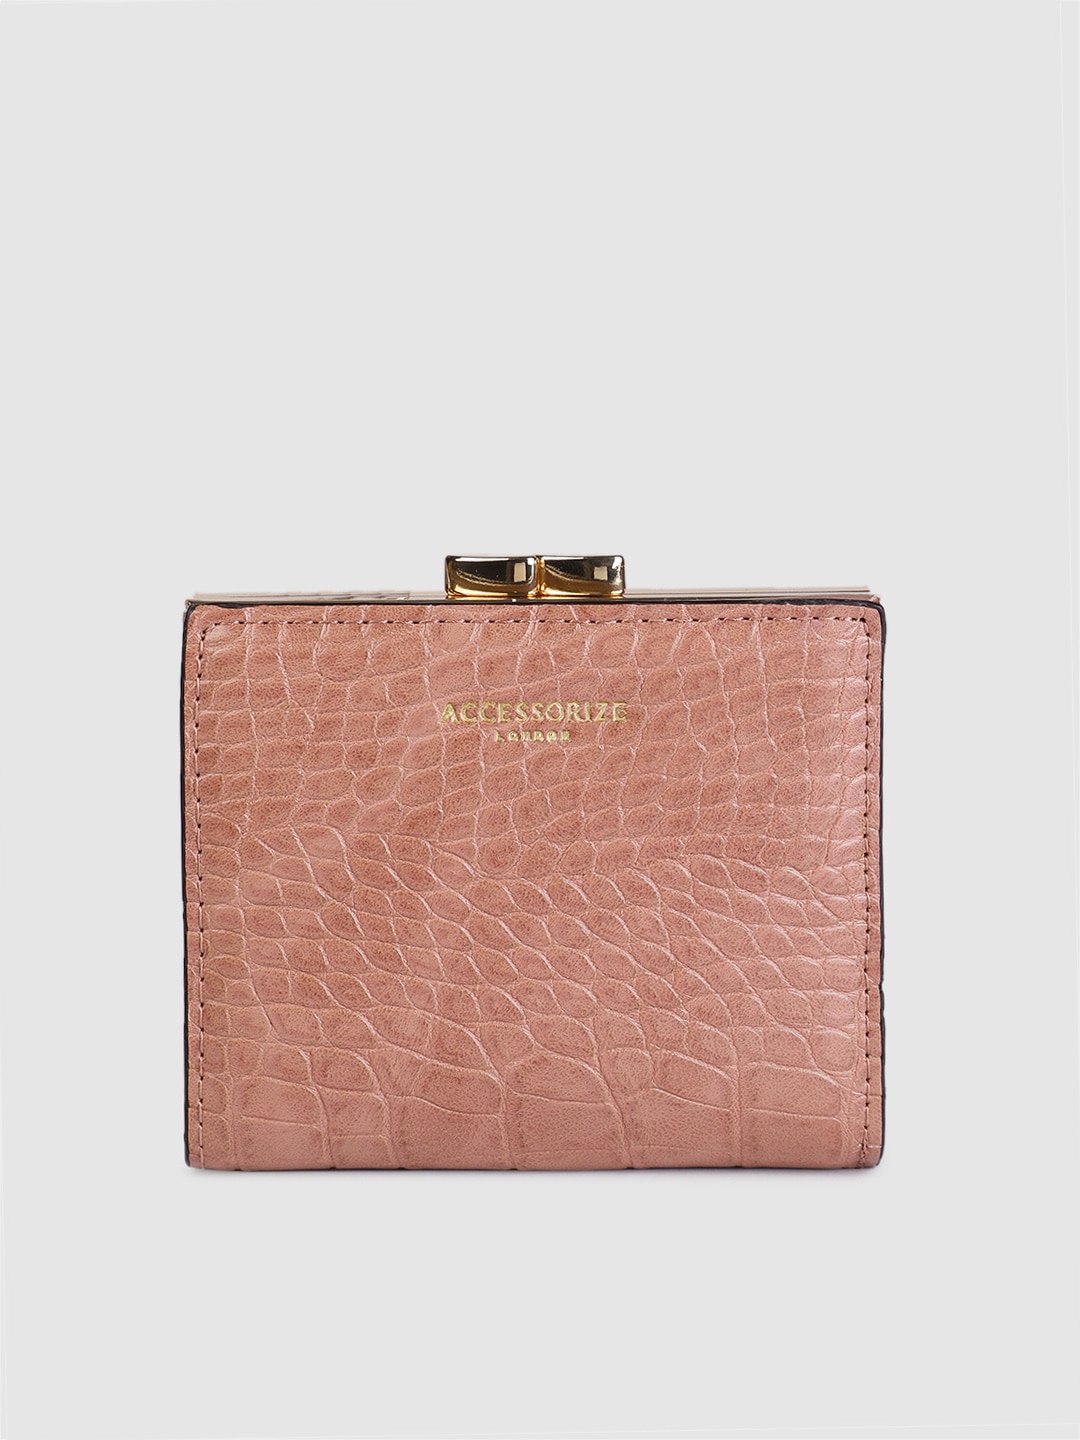 Accessorize Women Pink Animal Textured Two Fold Wallet Price in India